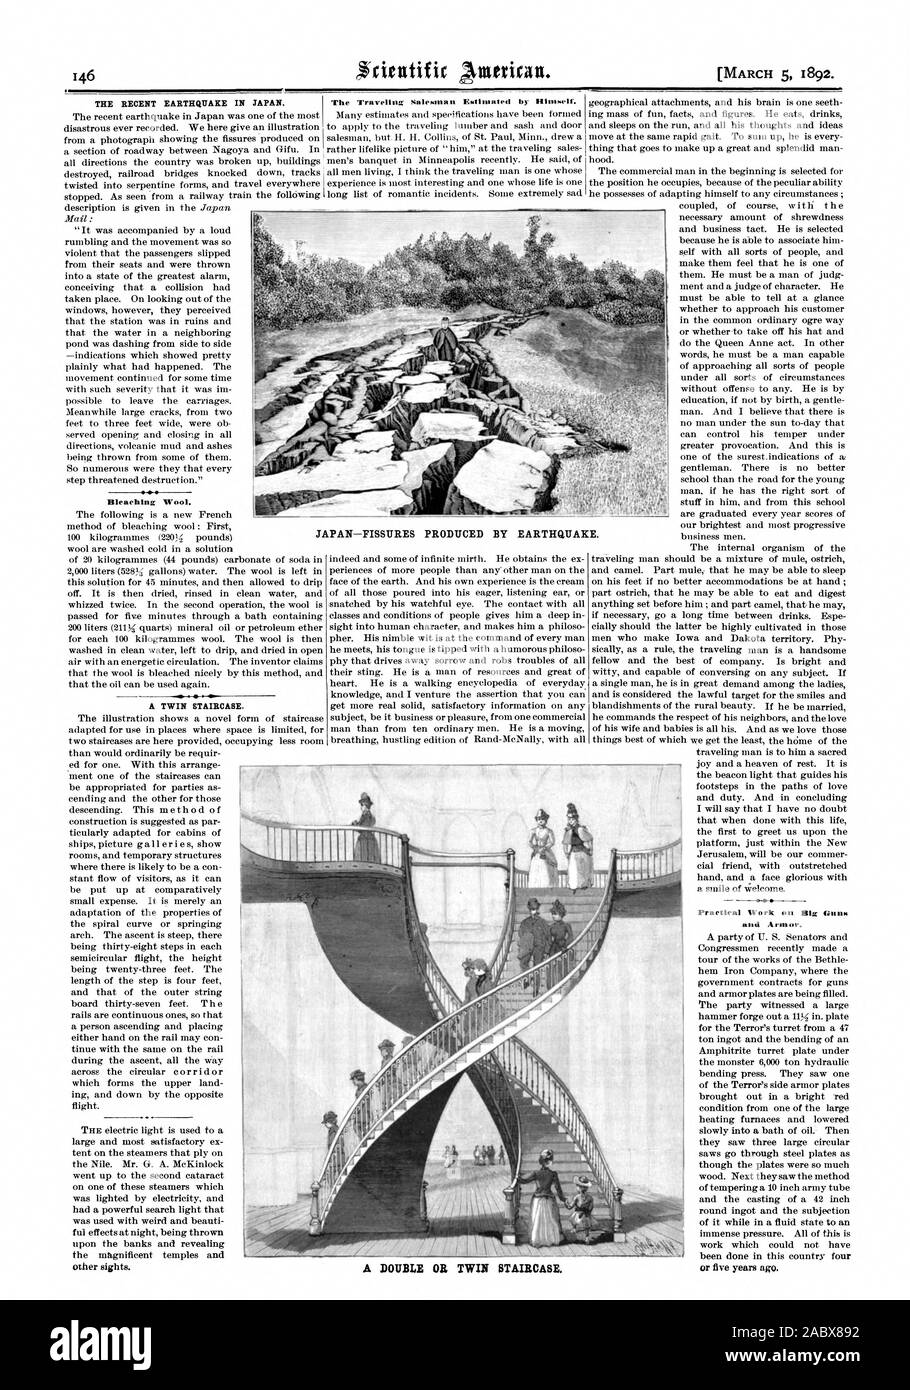 The Traveling Salemnatt Pollinated by Himself. JAPAN—FISSURES PRODUCED BY EARTHQUAKE. THE RECENT EARTHQUAKE IN JAPAN. Bleaching Wool. A TWIN STAIRCASE. Practical Work on Big Guns and Armor. A DOUBLE OR TWIN STAIRCASE., scientific american, 1892-03-05 Stock Photo